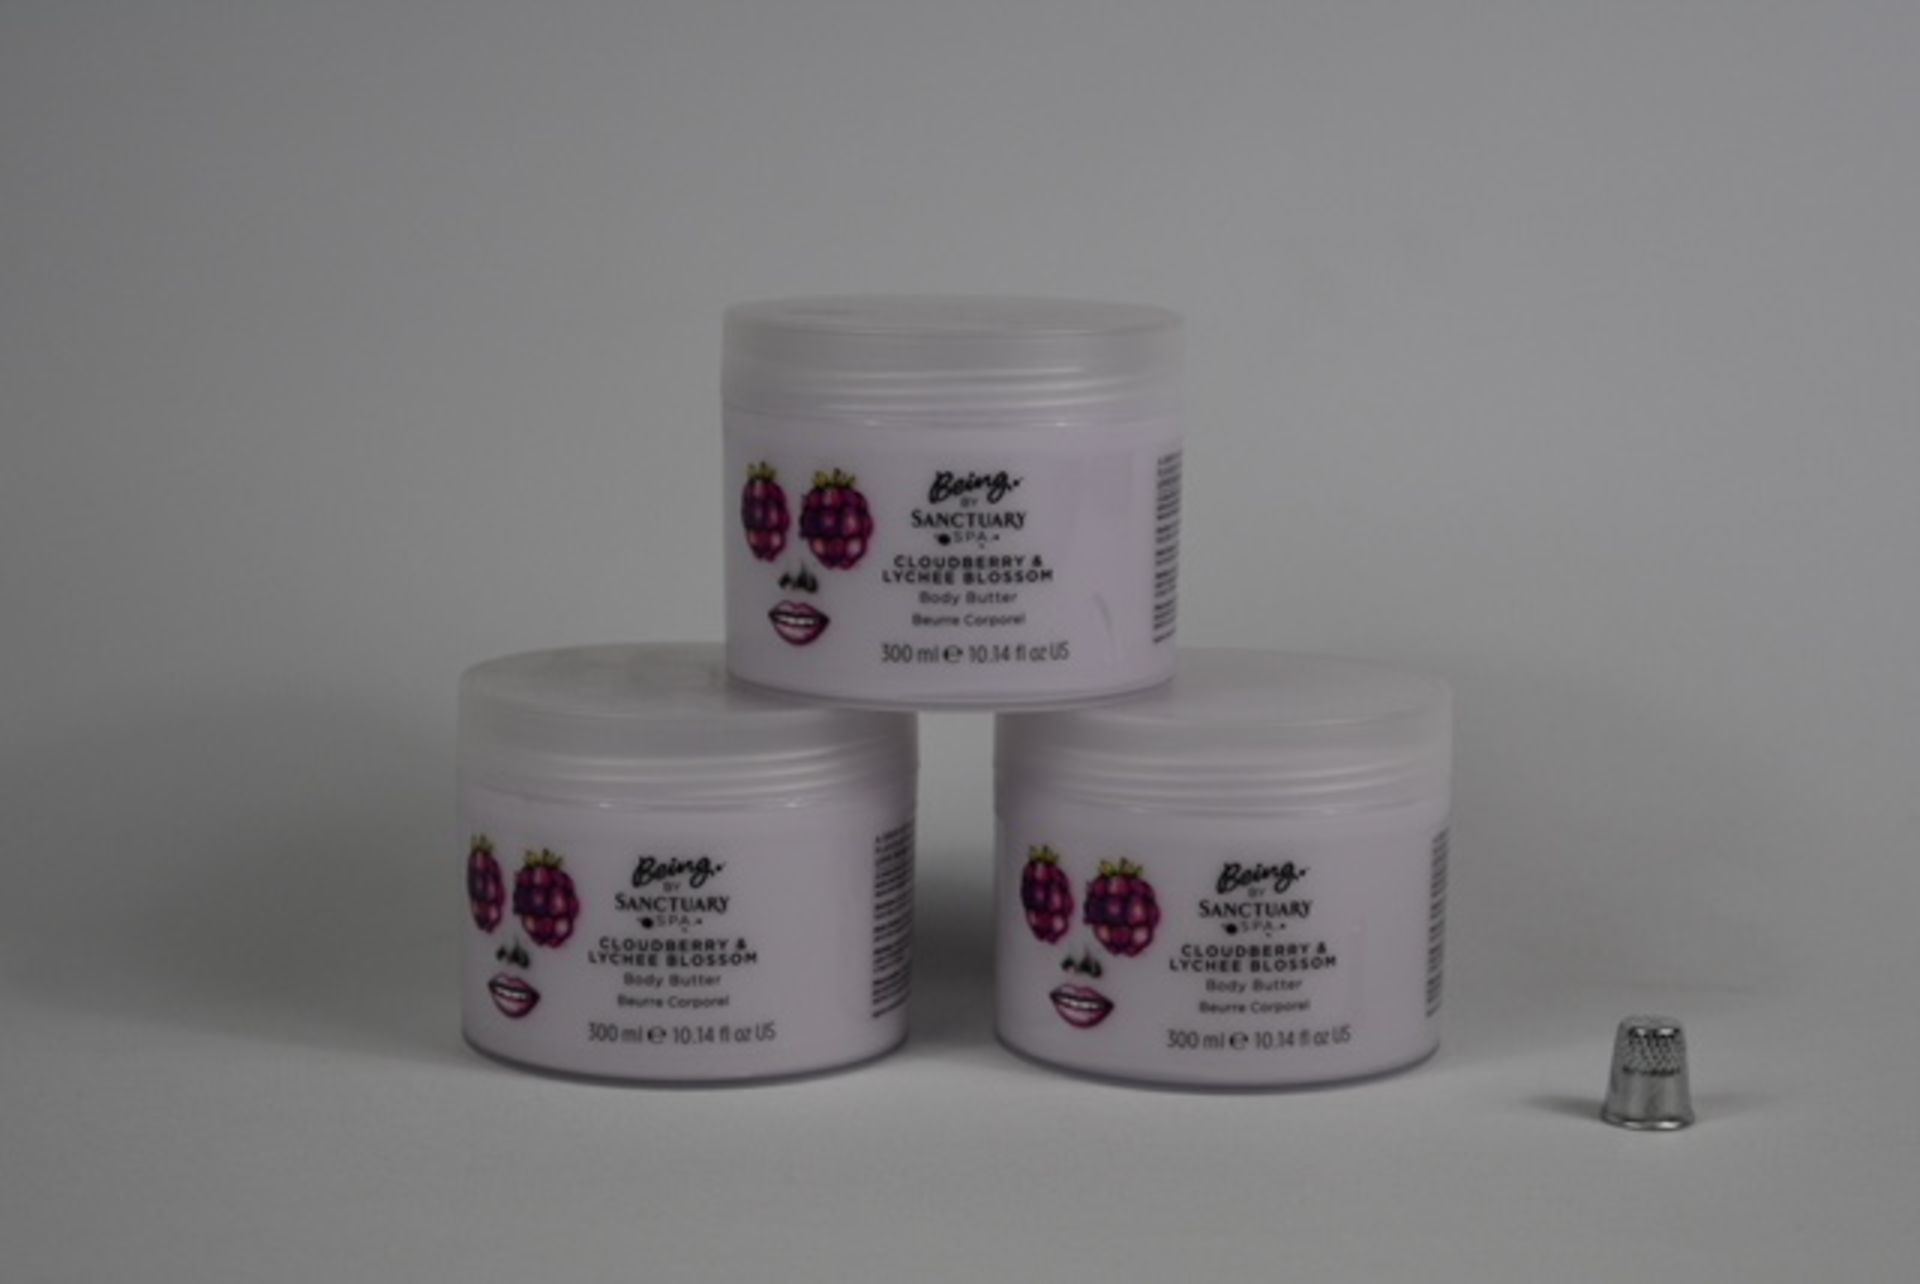 30 X 300 ML TUBS OF BEING BY SANCTUARY SPA CLOUDBERRY AND LYCHEE BLOSSOM BODY BUTTER